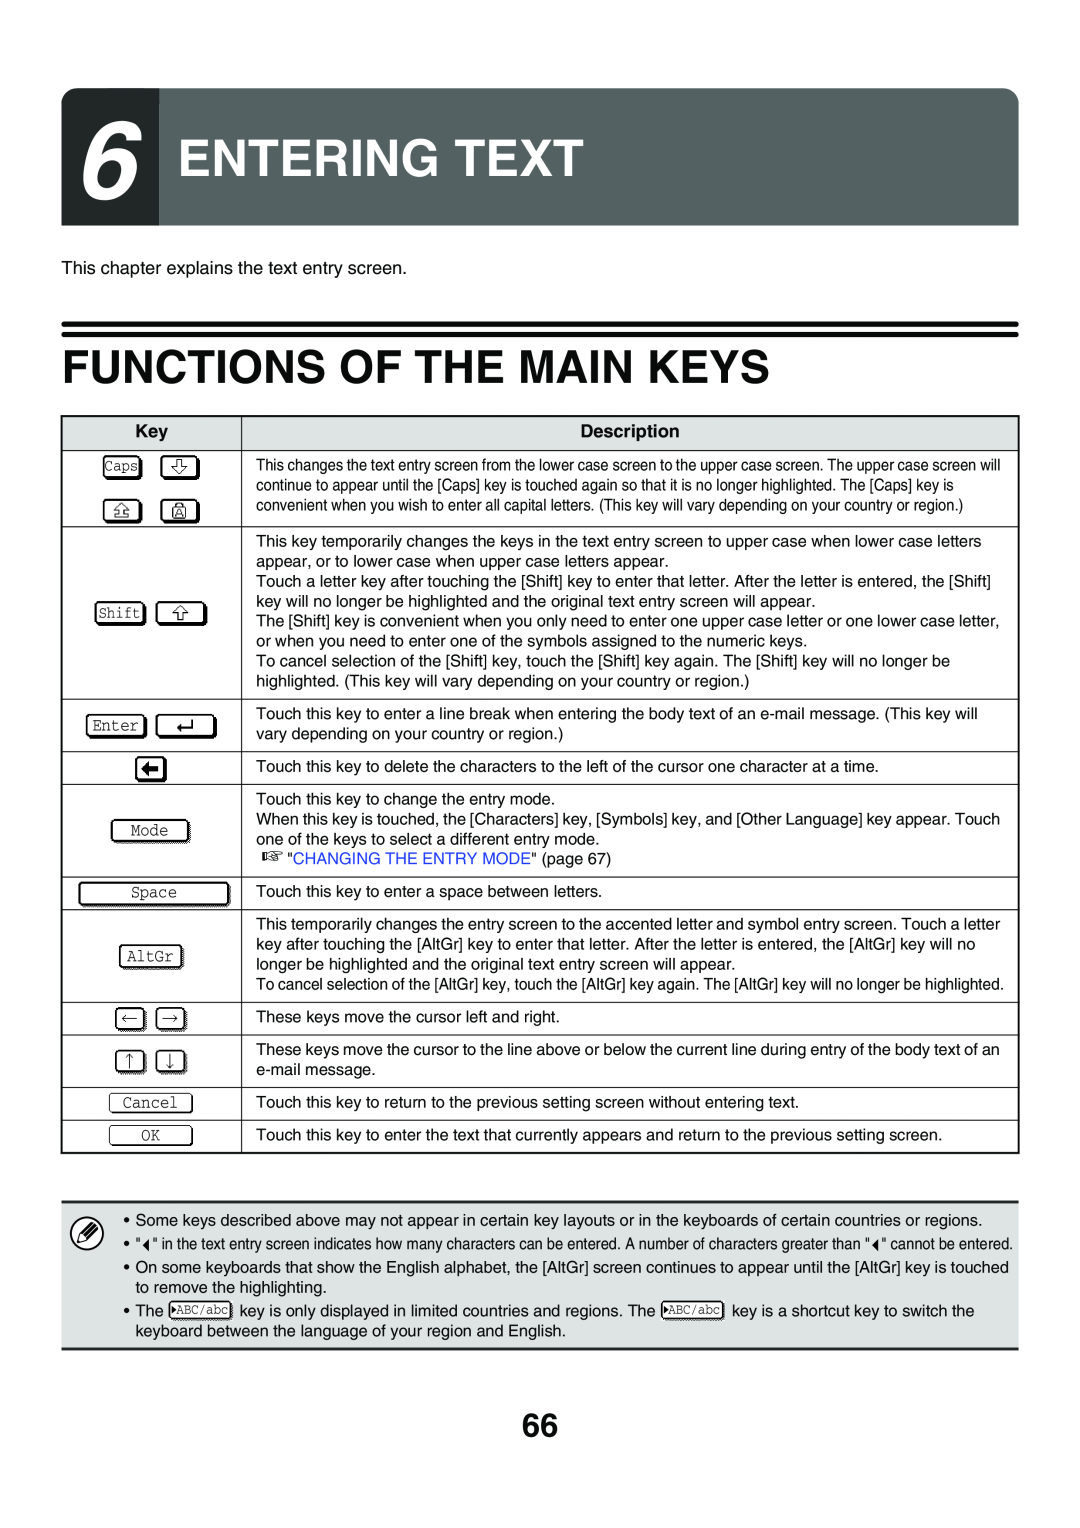 Sharp MX-3500N manual Entering Text, Functions Of The Main Keys, Description, Mode, Space, CHANGING THE ENTRY MODE page 